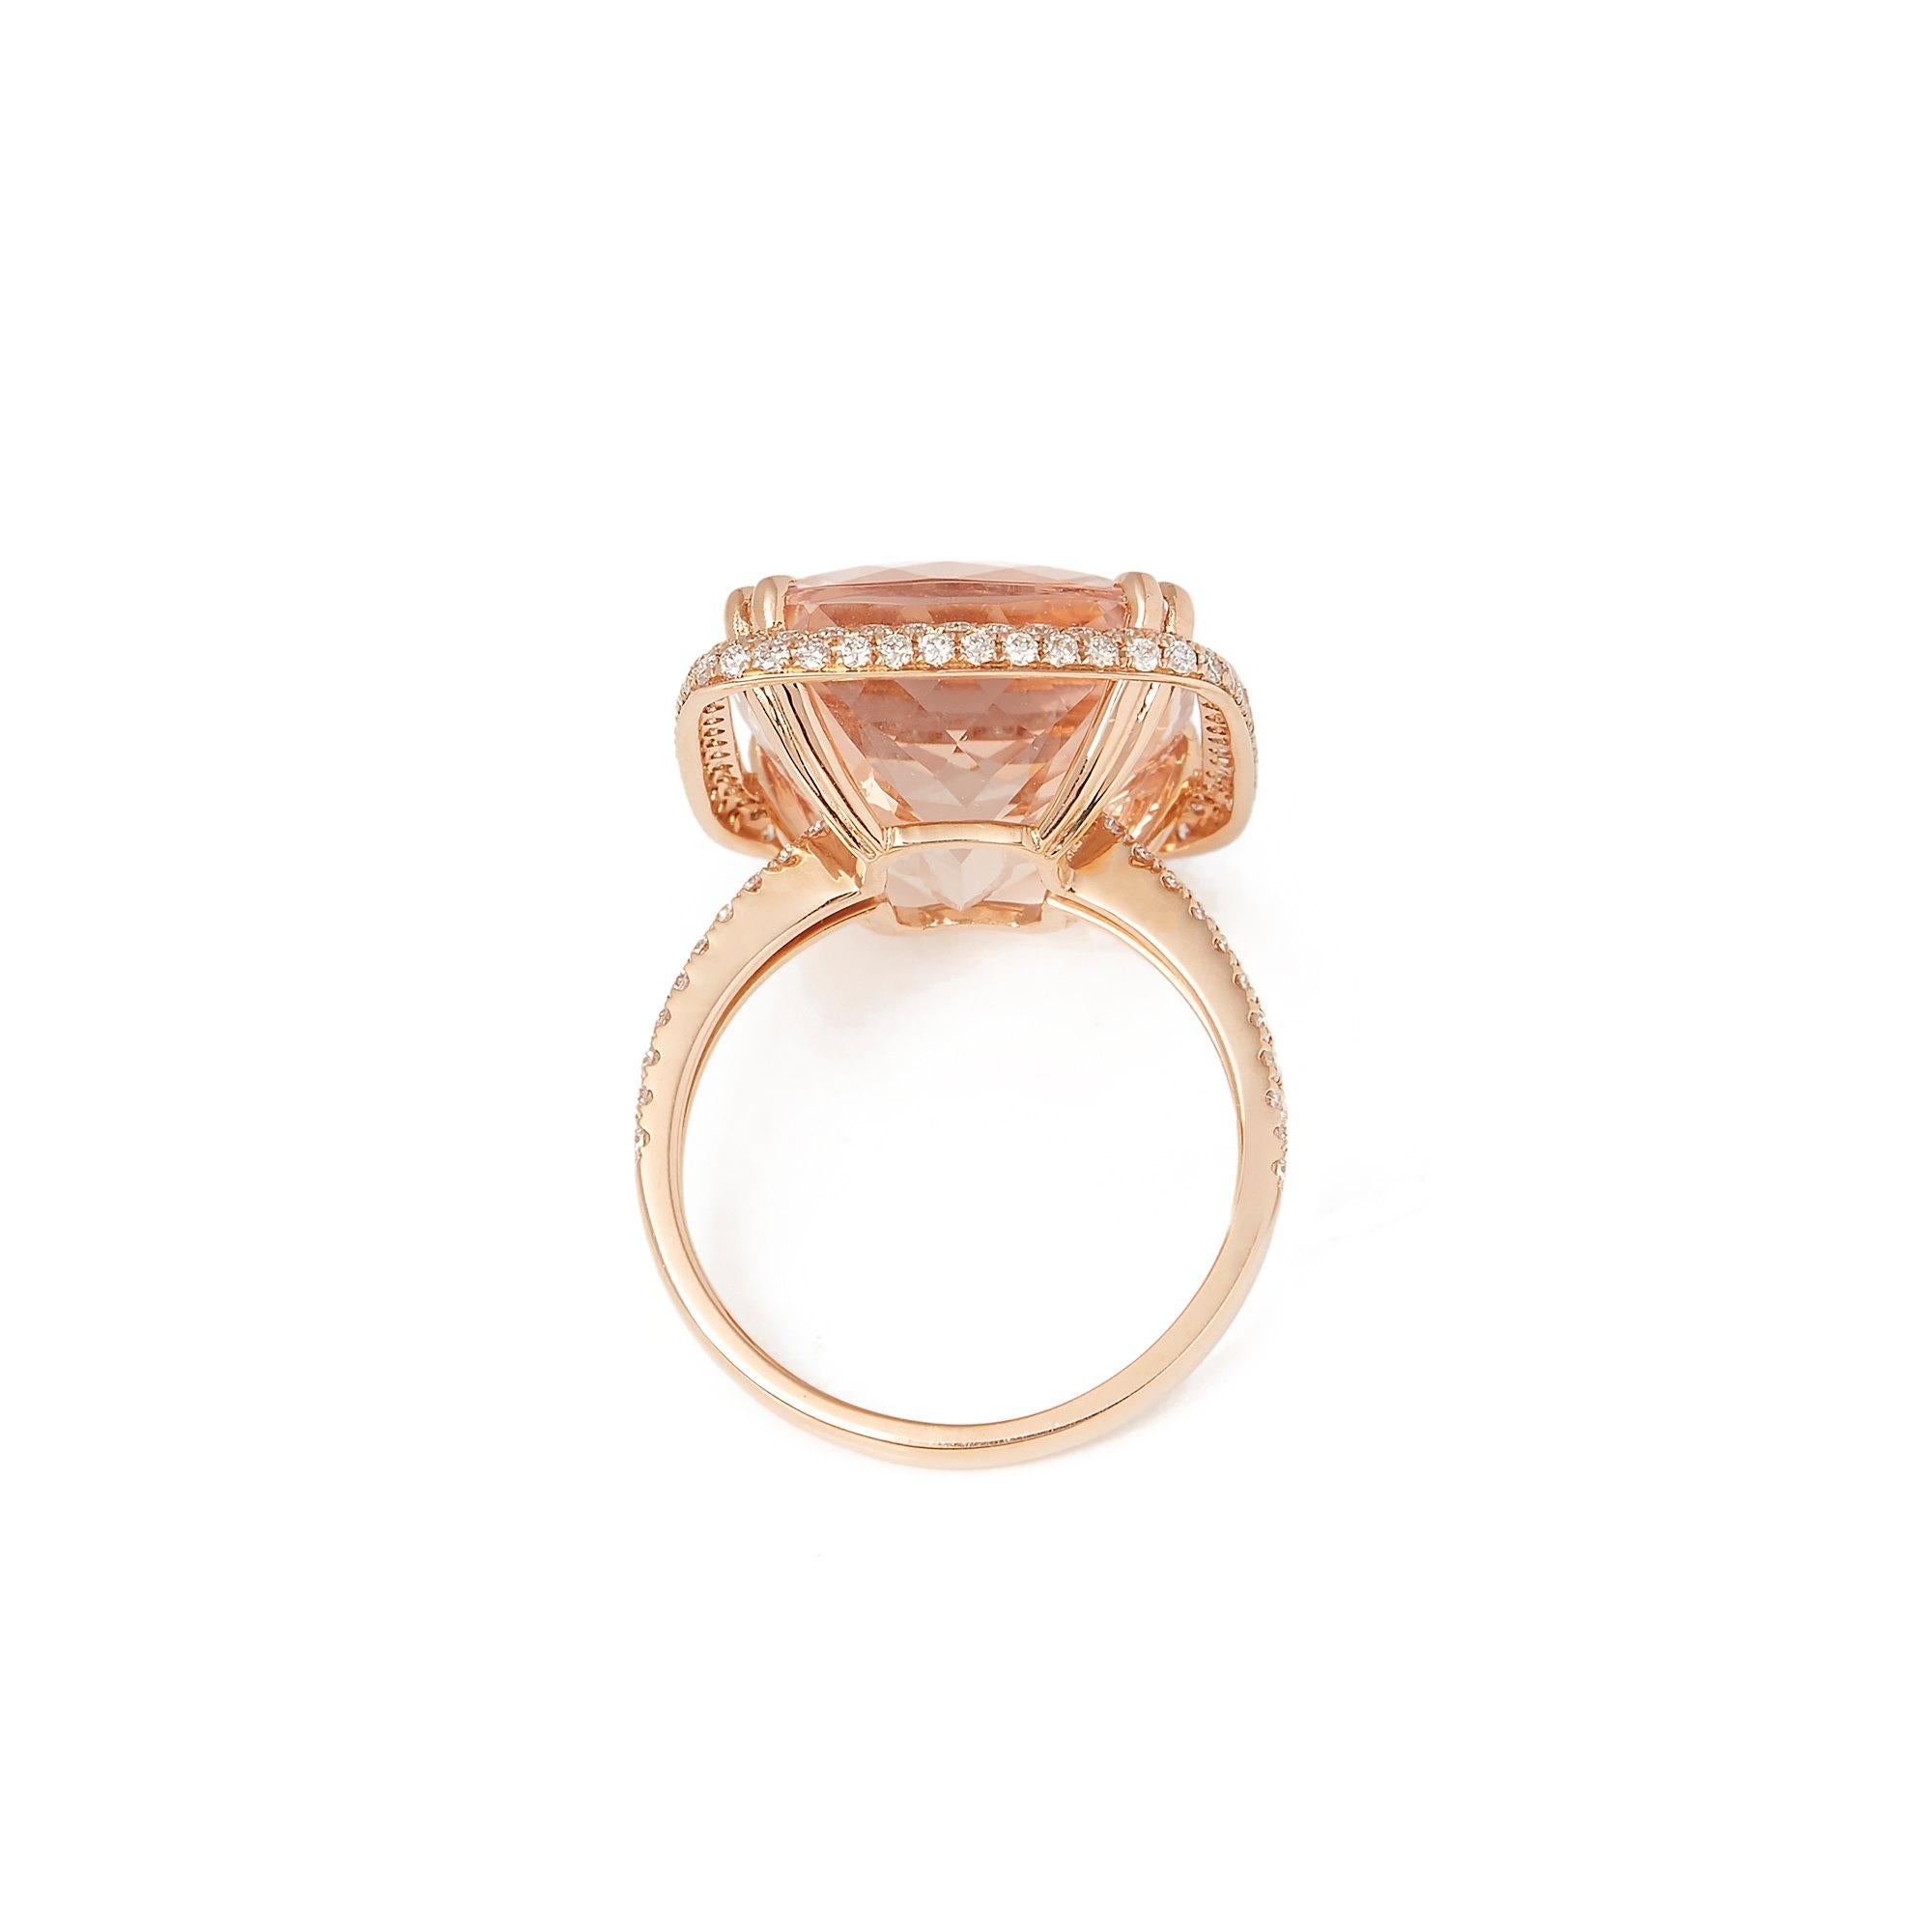 Certified 16.71ct Cushion Cut Brazilian Morganite and Diamond 18ct Gold Ring In Excellent Condition For Sale In Bishop's Stortford, Hertfordshire